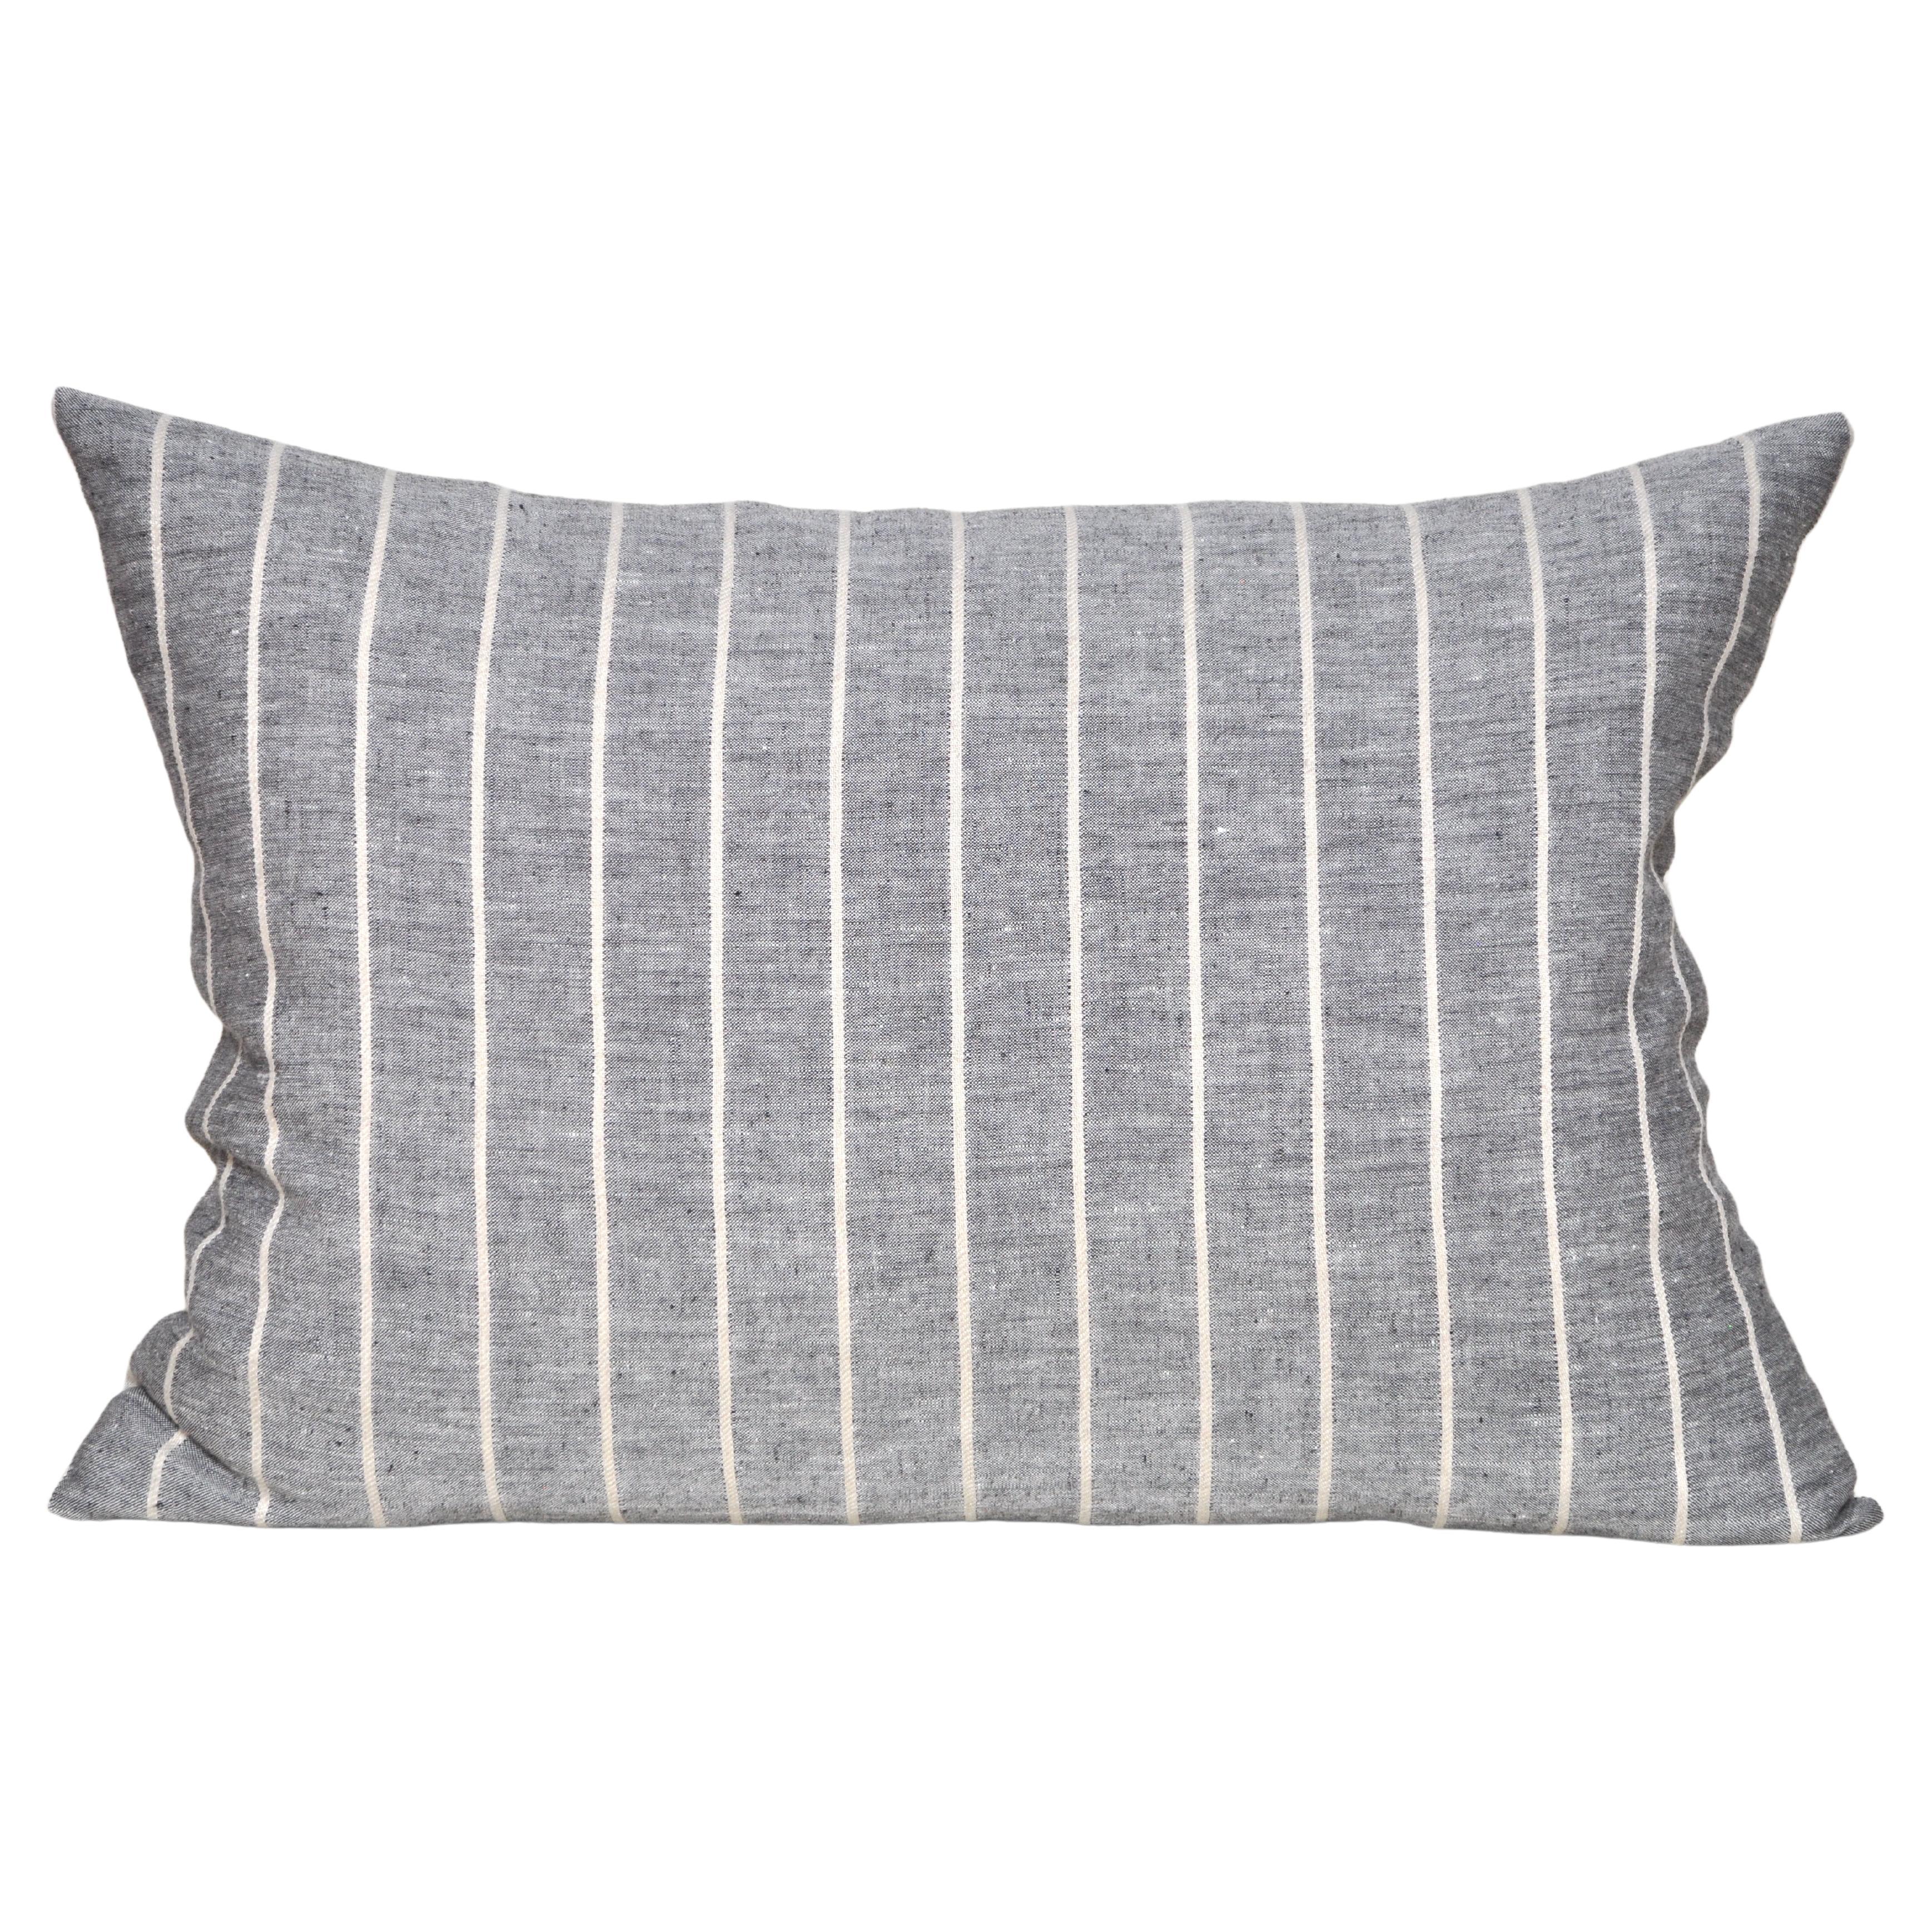 Luxury Vintage Irish Linen Pillow by Katie Larmour Couture Cushions Navy Grey